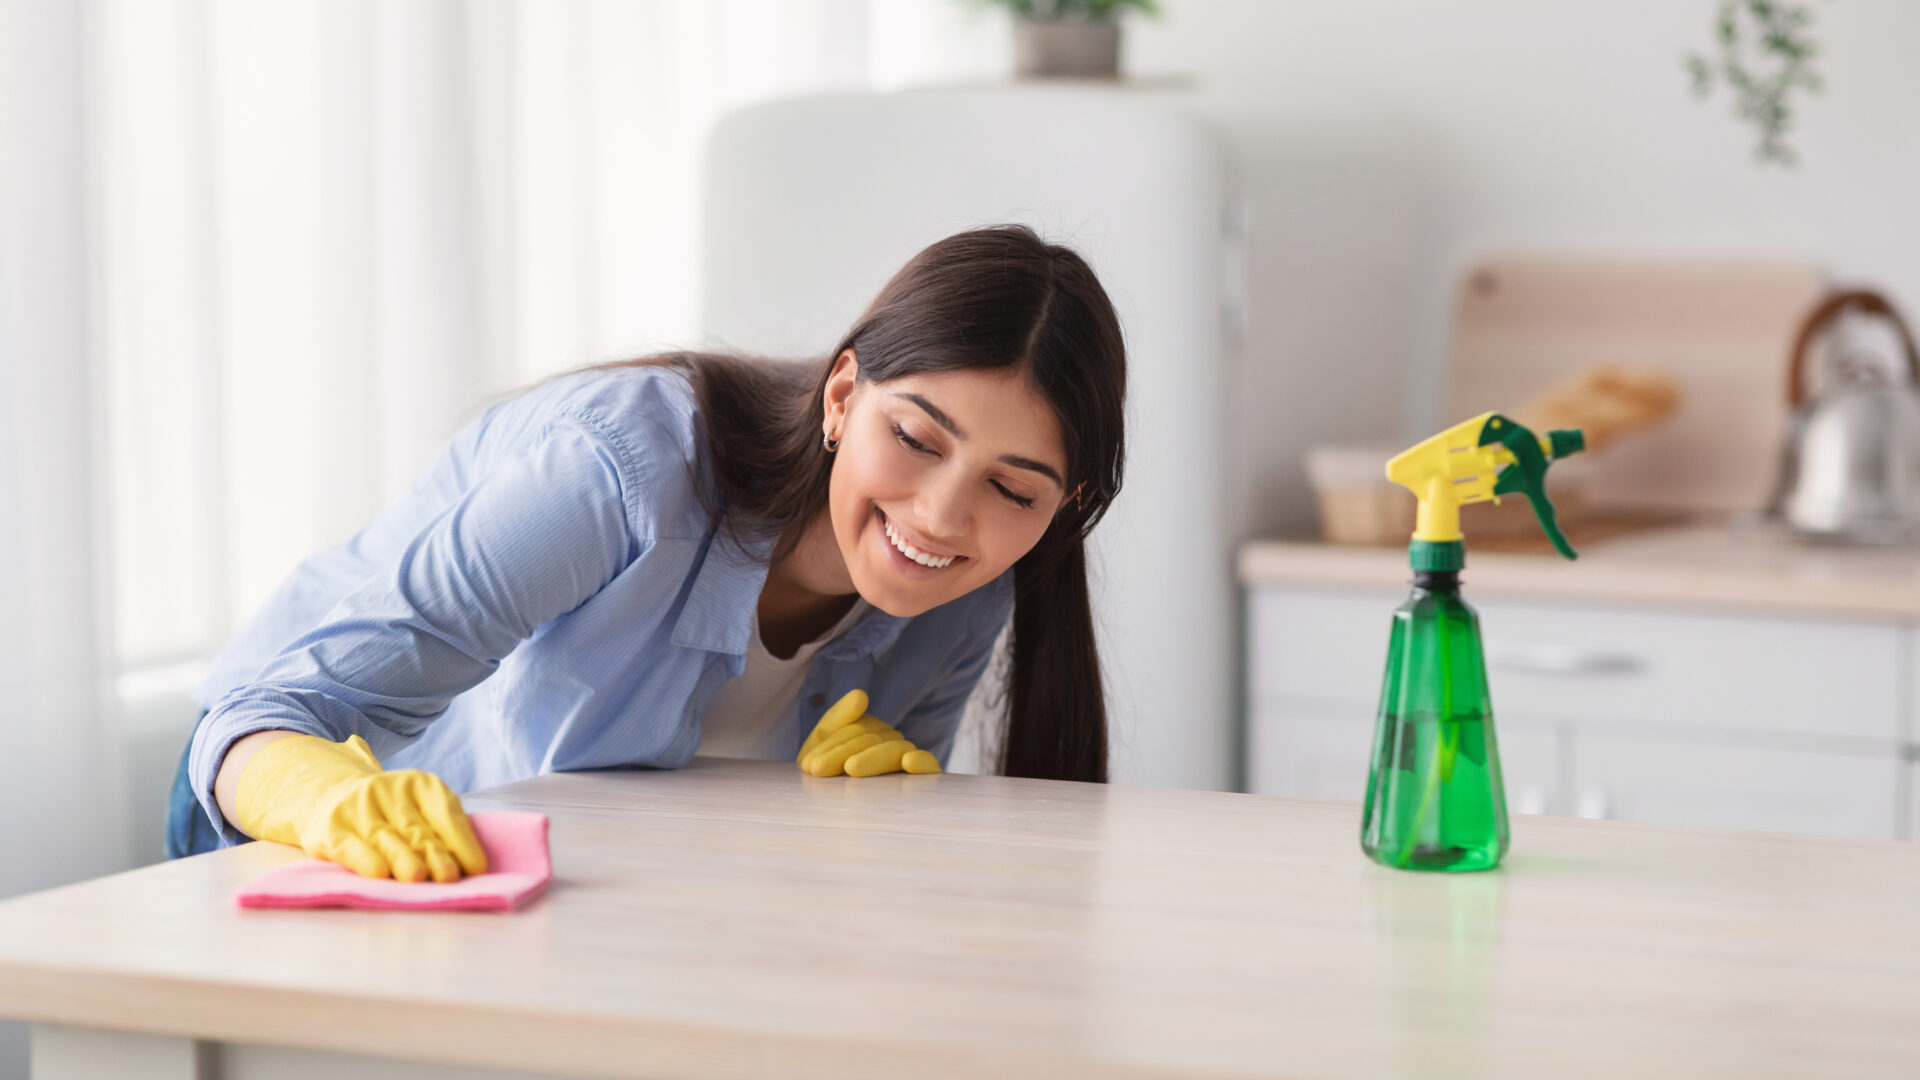 Portrait of happy young housewife in yellow rubber gloves cleaning dining table at kitchen. Positive millennial maid keeping her home tidy and clean, wiping surface with microfiber cloth